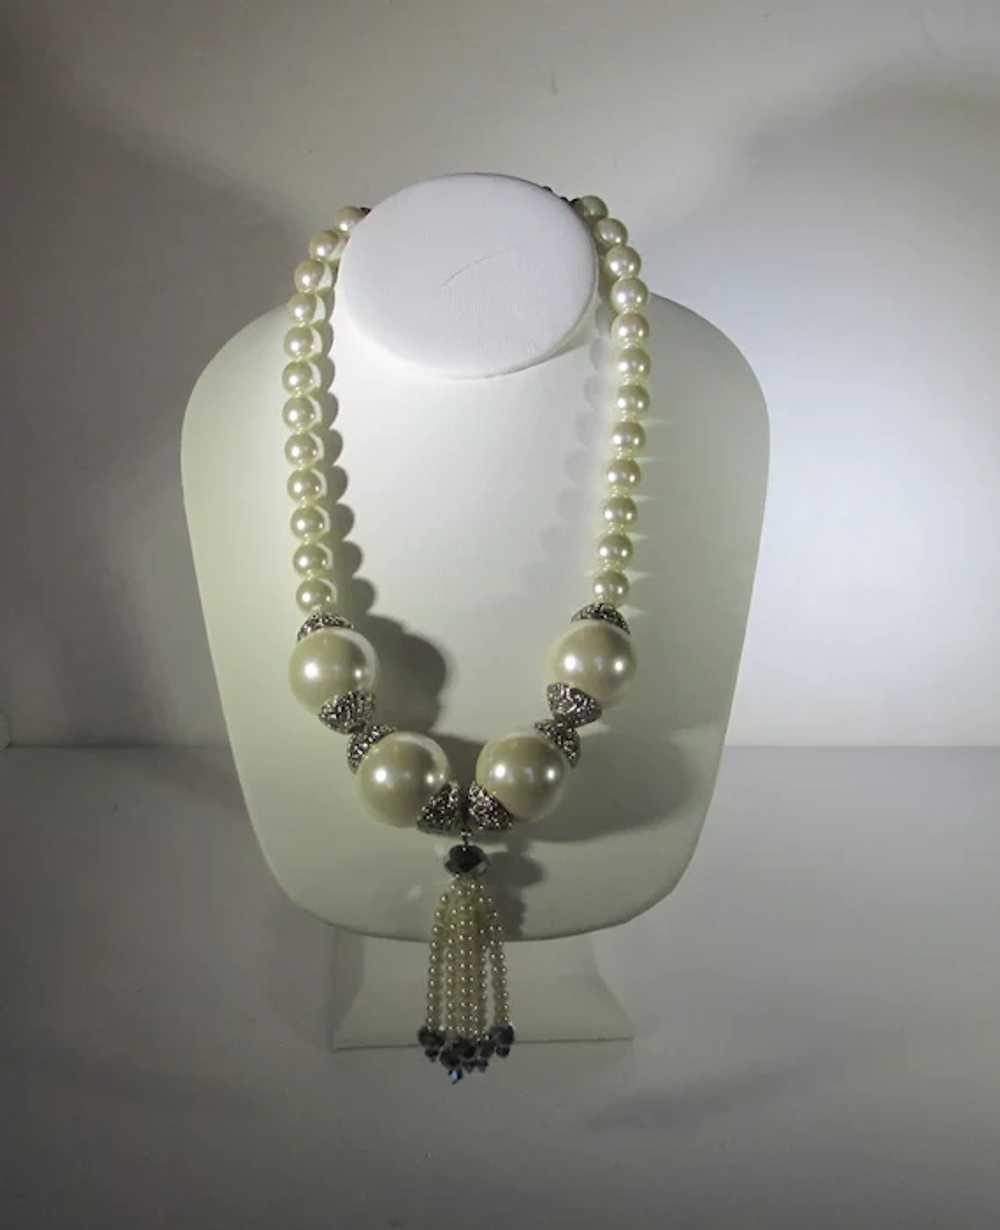 Vintage Faux Pearl Necklace With Lots of Bling - image 11